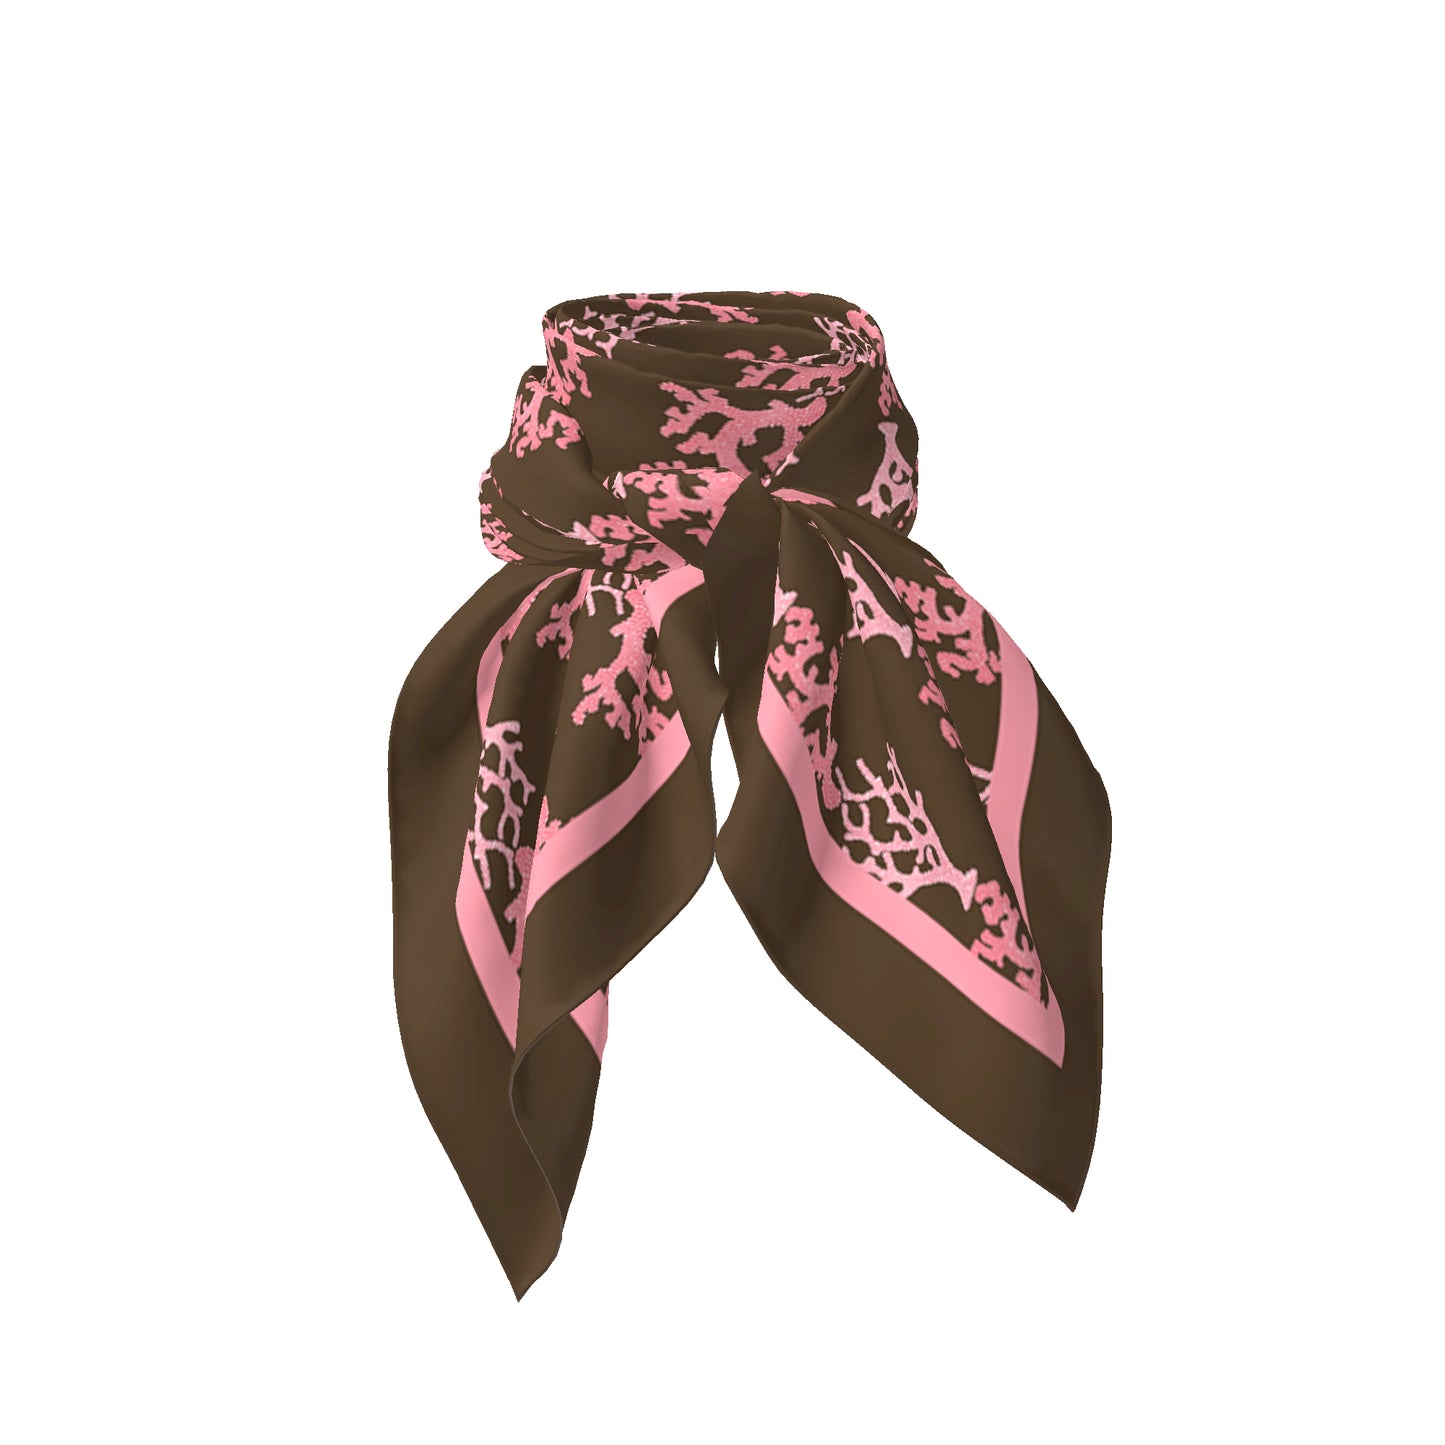 Sea Coral Print Satin Square Scarf, Brown & Pink, Two Sizes